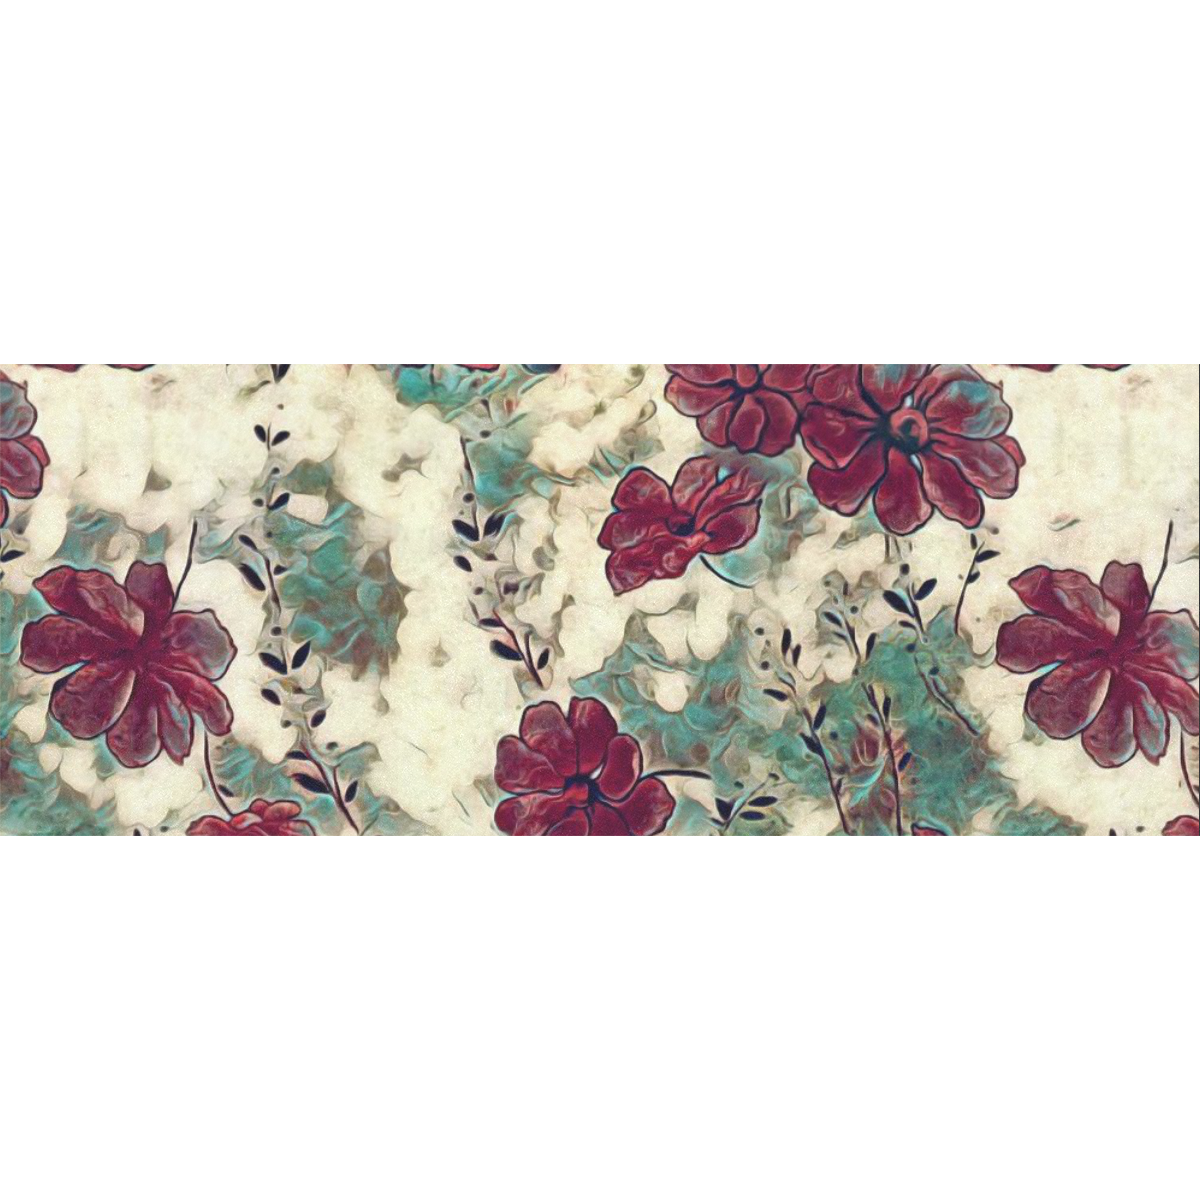 Floral Dreams 10 by JamColors Gift Wrapping Paper 58"x 23" (2 Rolls)